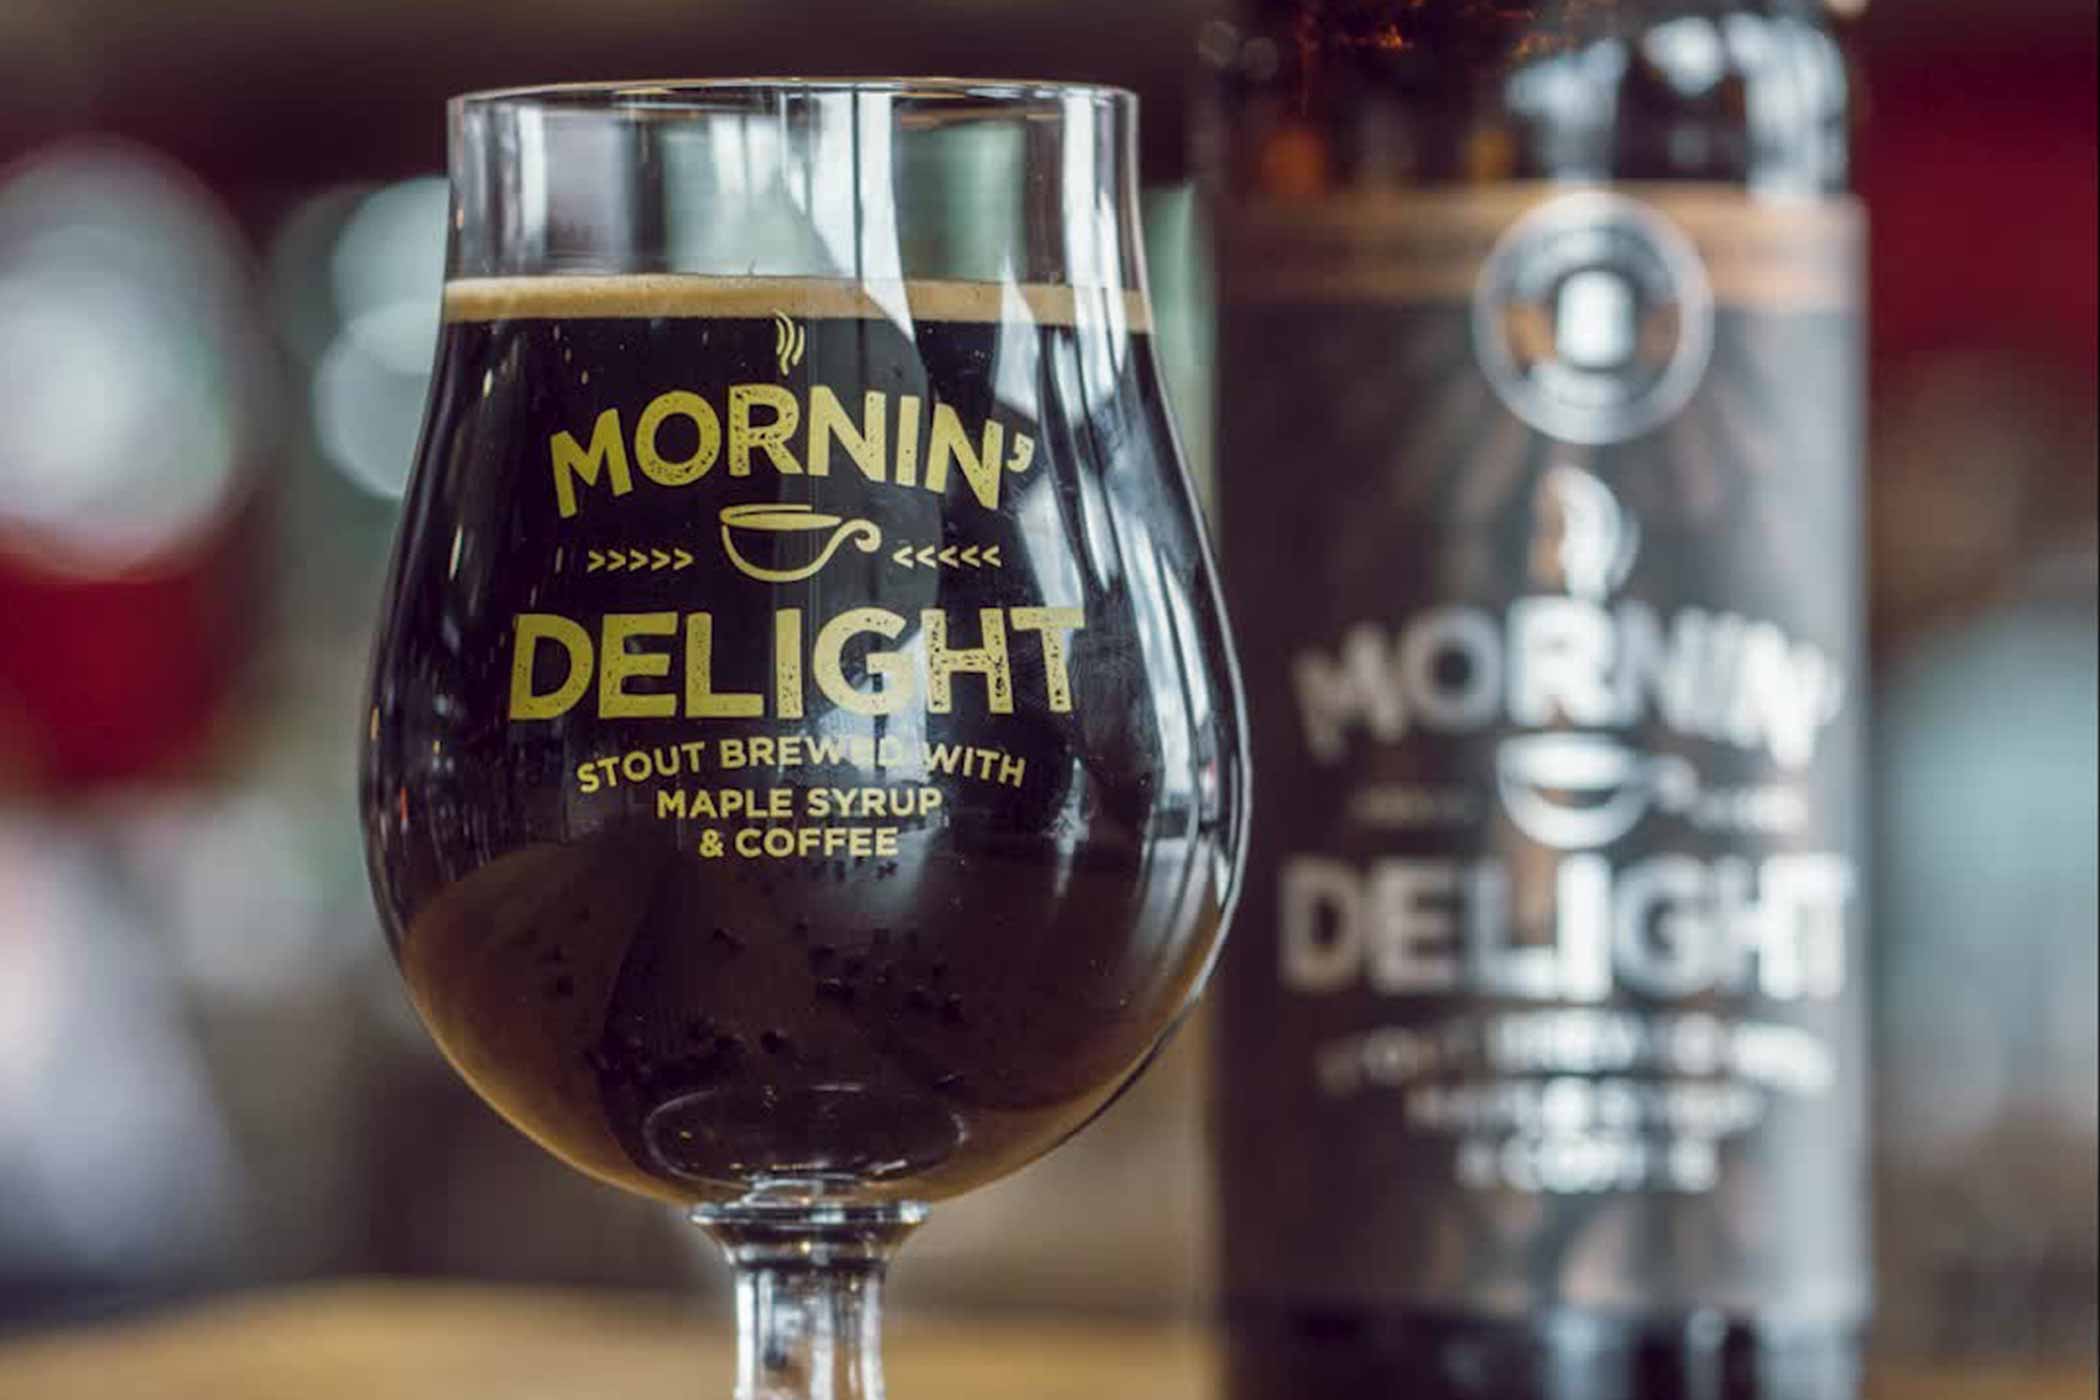 Will That Coffee Stout Keep You Up at Night?